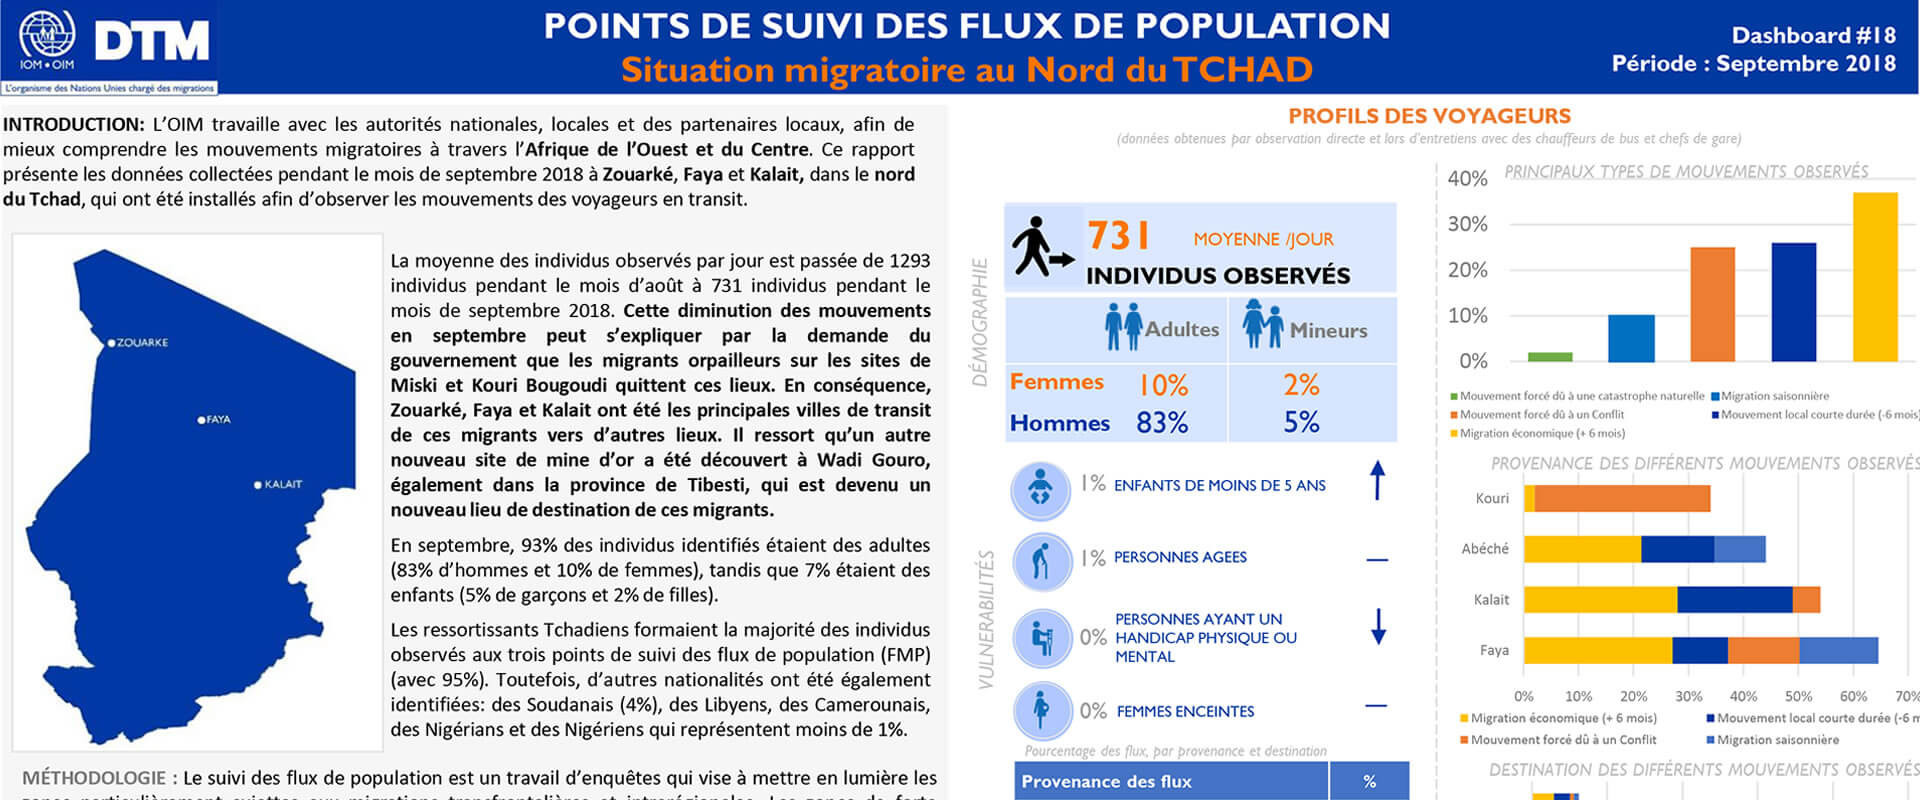 Chad - Dashboard Tracking Points Of Population Flow 18 (September 2018) [French]